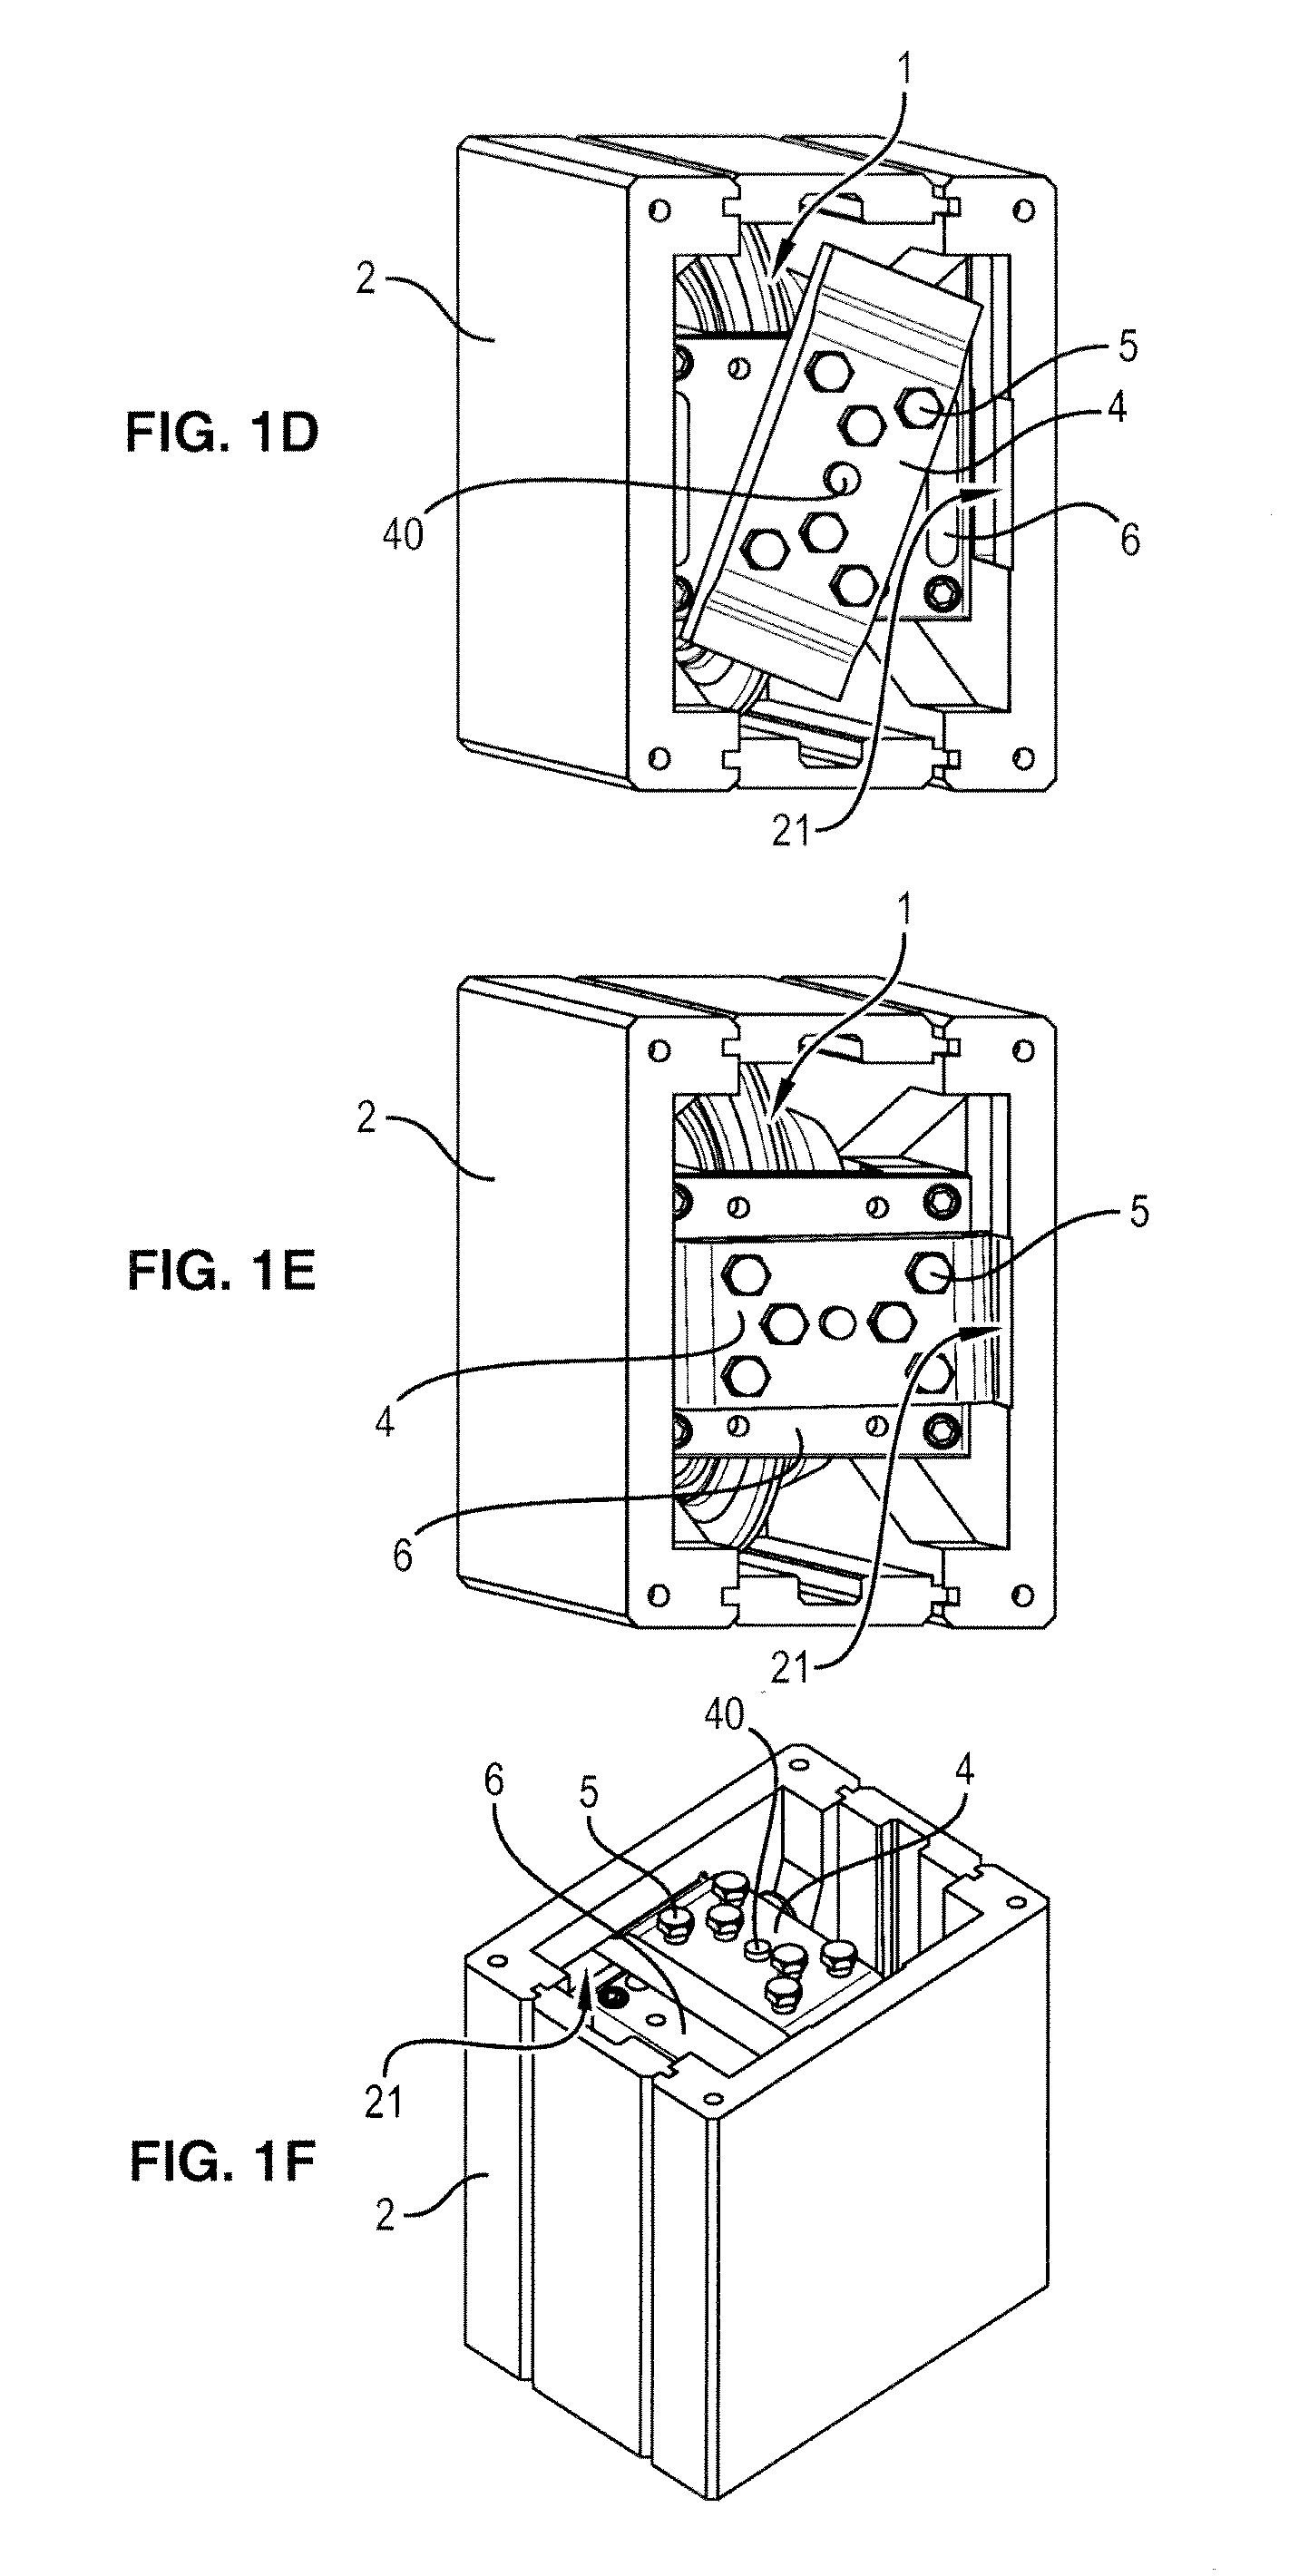 Method for replacing a tunnel boring machine roller cutter, handling device and roller cutter suited to such a method